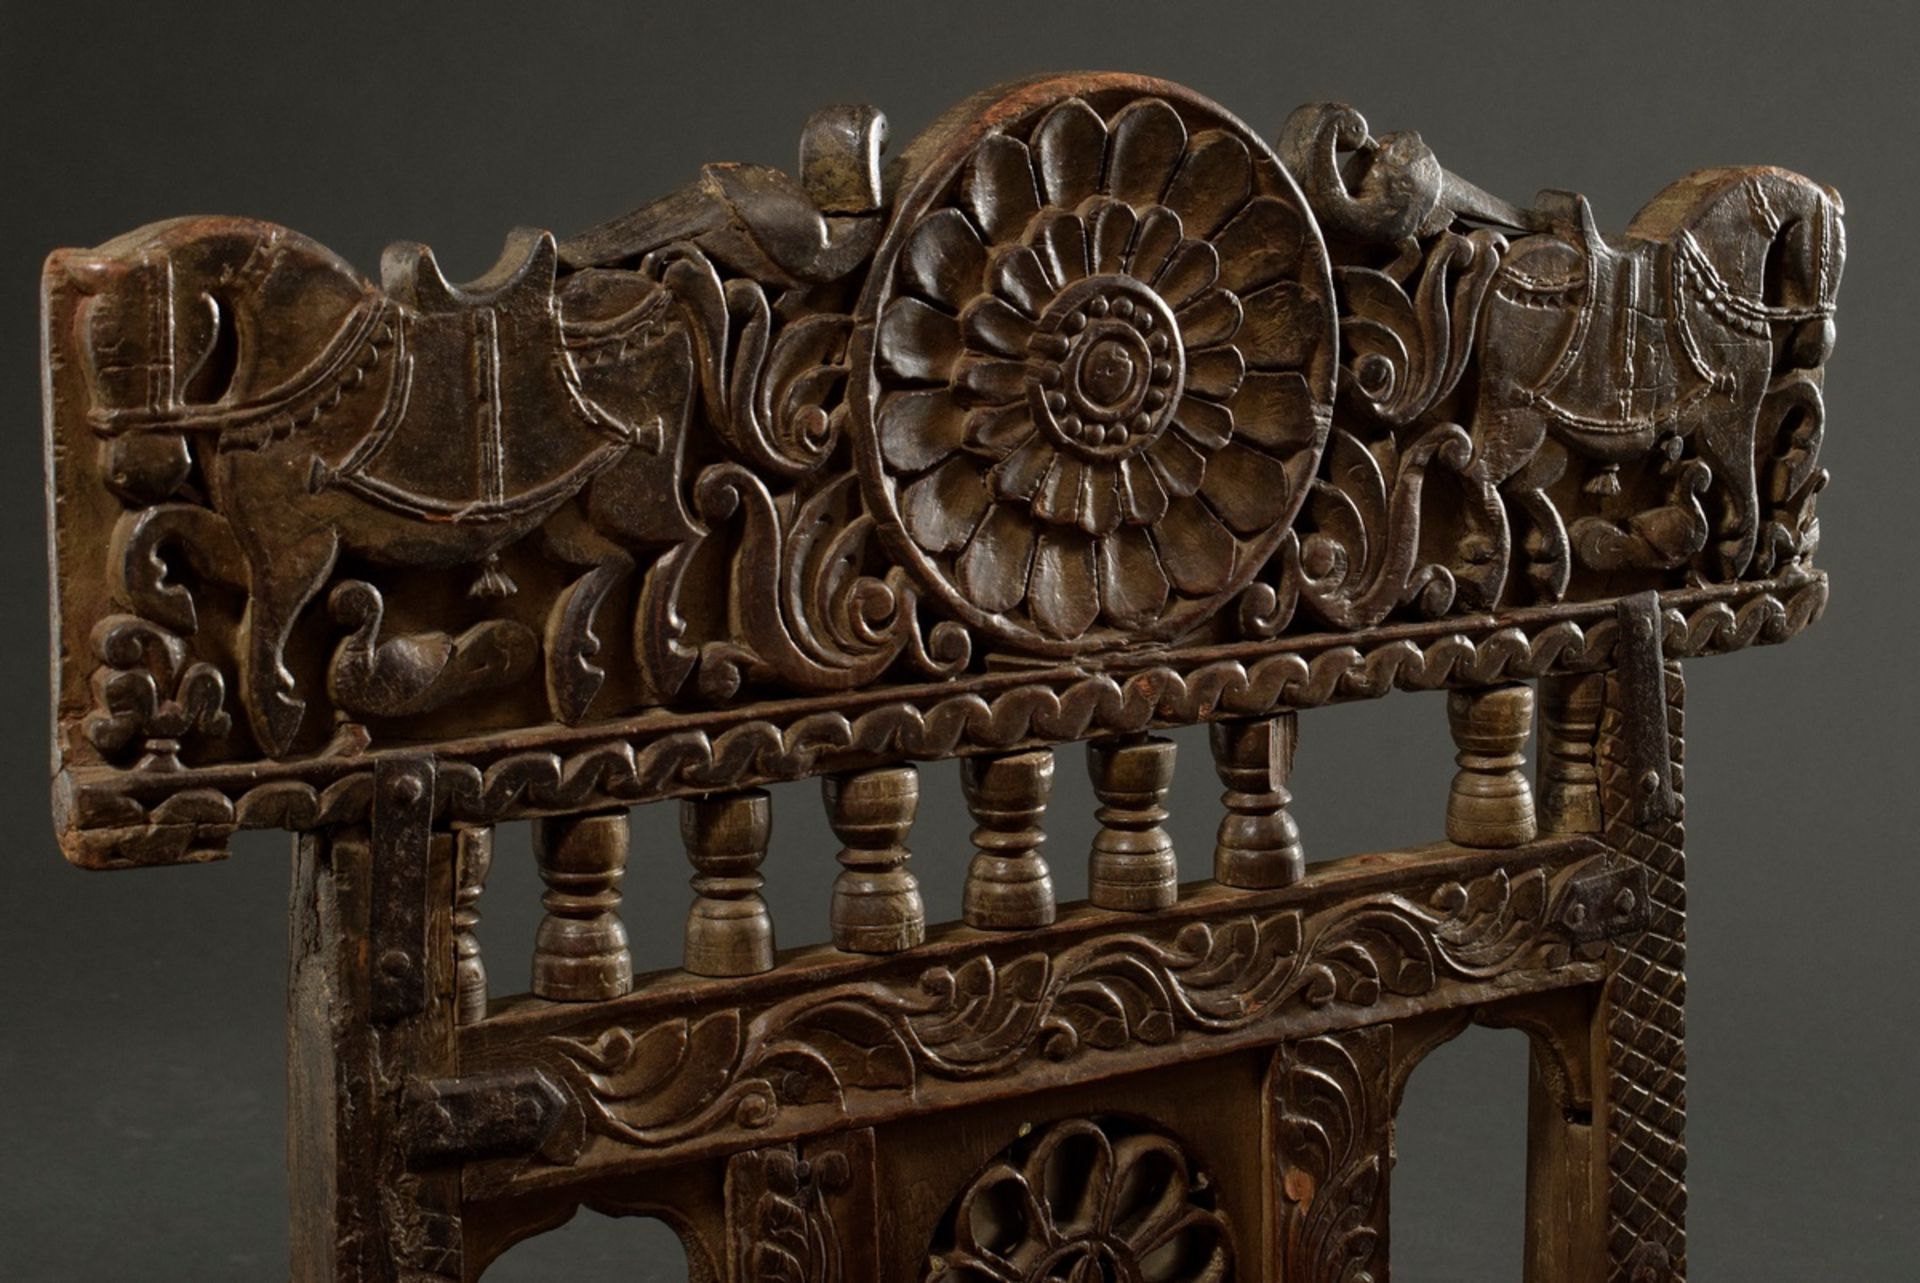 Indian wedding chair with richly carved frame "horses, peacocks and rosettes", around 1900, wood wi - Image 6 of 6